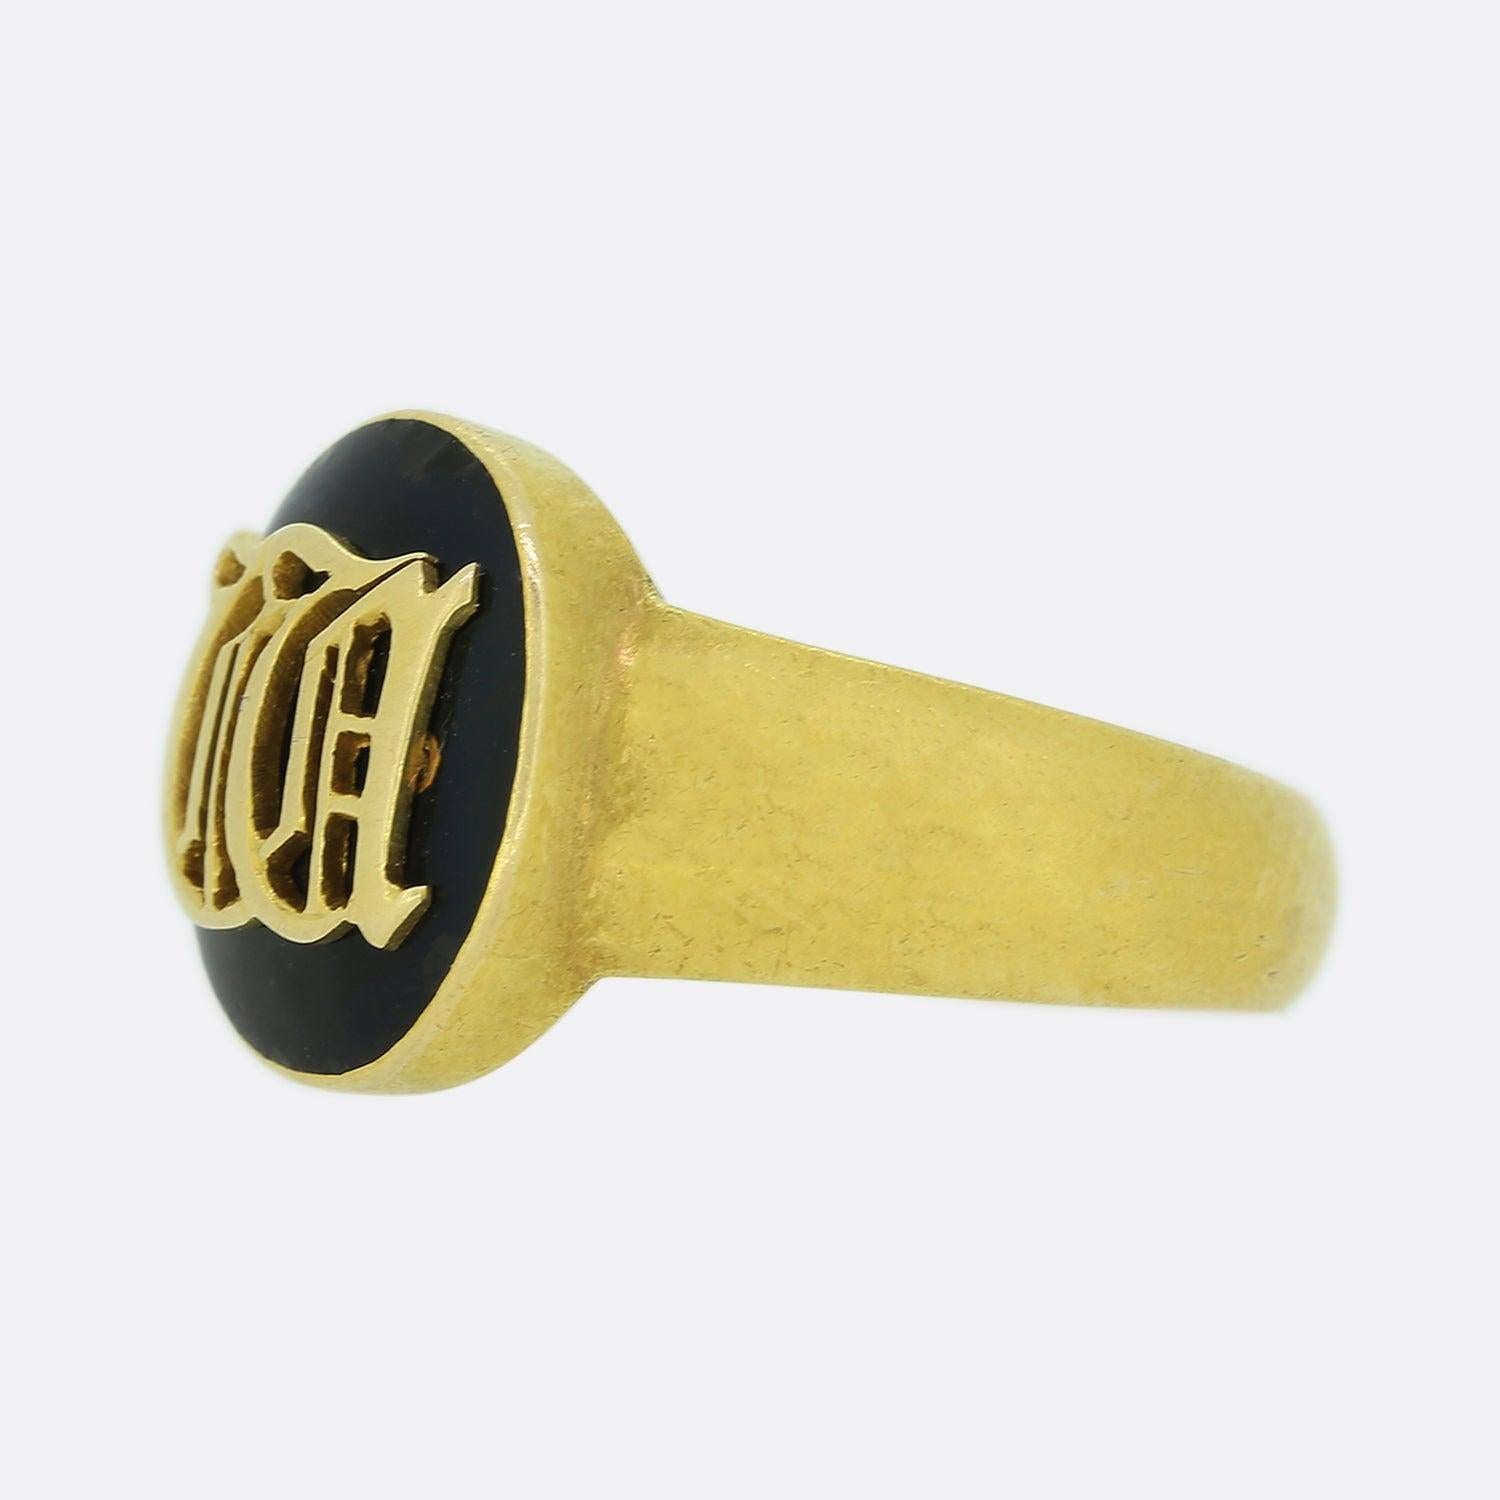 This is a wonderful 18ct yellow gold mourning ring from the Victorian era. The ring features initials on the front, a locket compartment on the back of the face of the ring and has been crafted in 18ct yellow gold. 

Condition: Used (Very